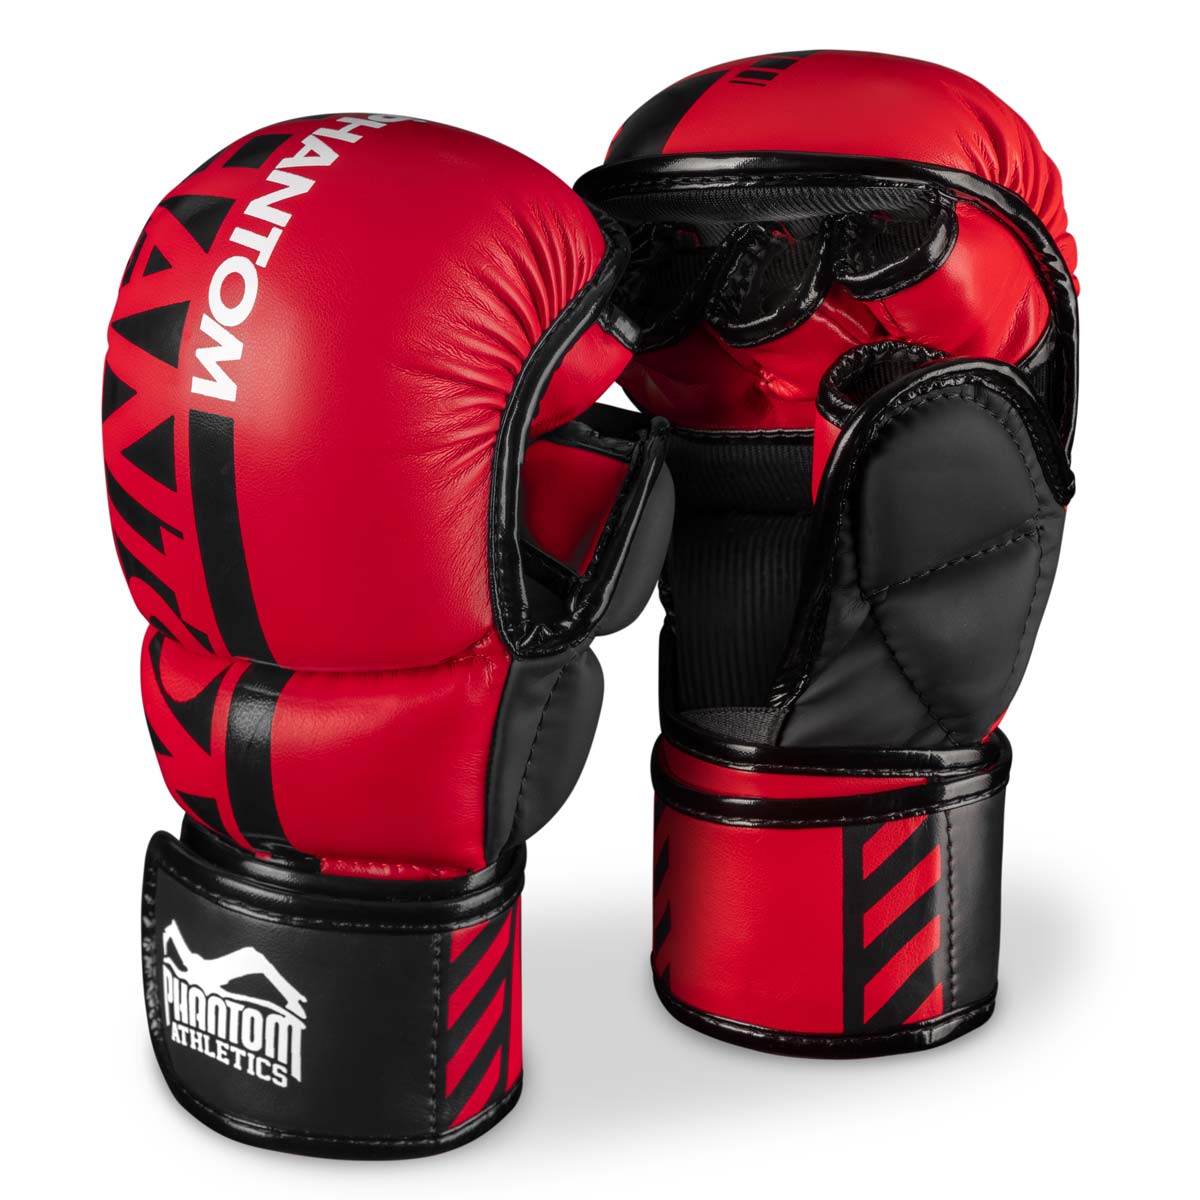 The Phantom MMA sparring gloves. The safest glove for your martial arts training. Now in the limited red color.